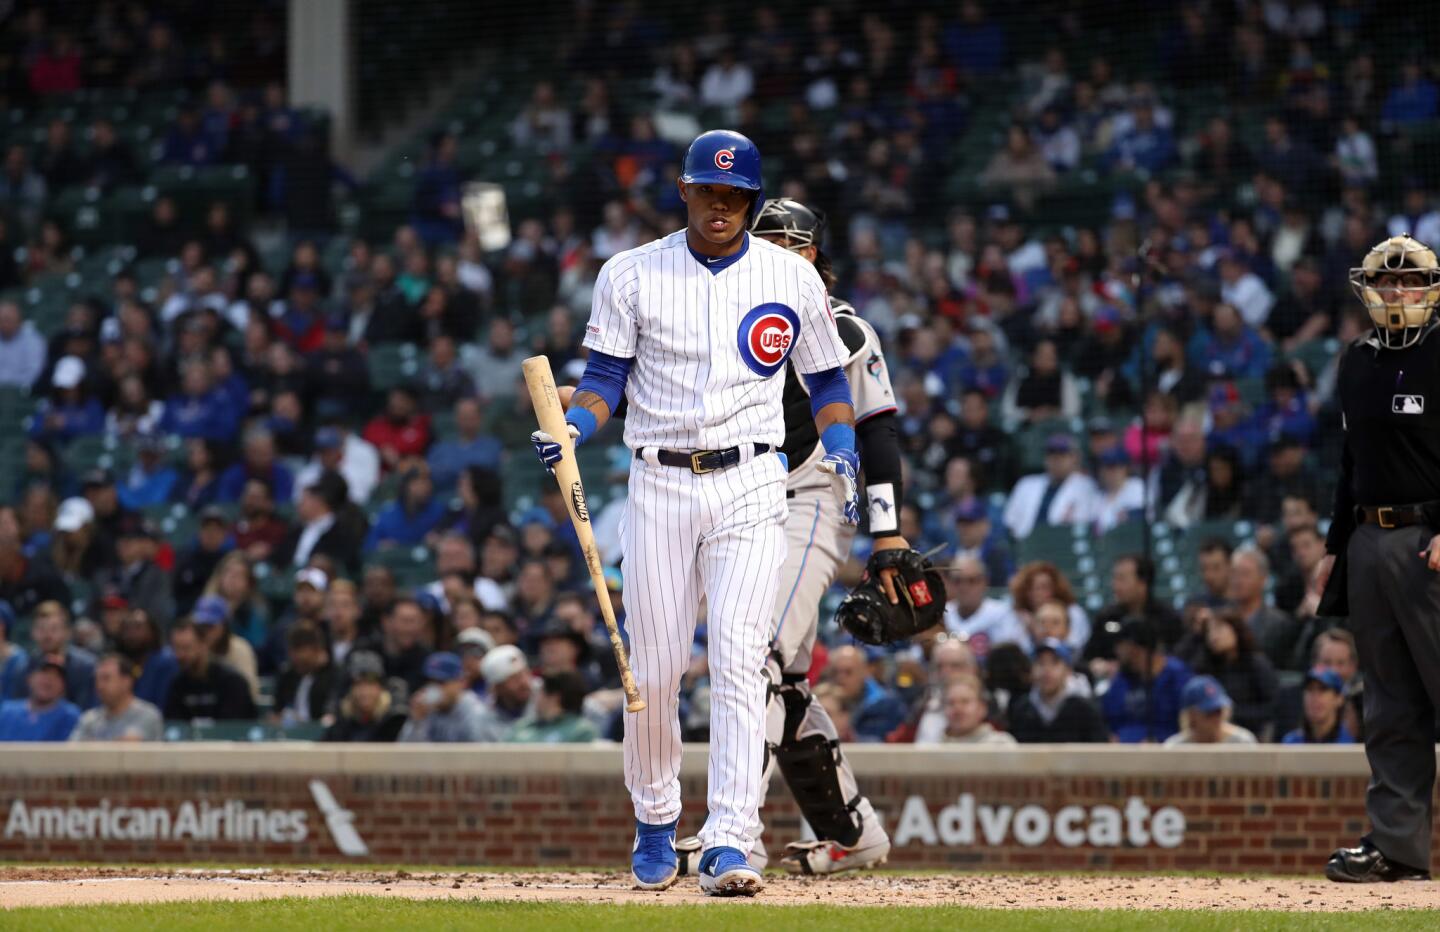 Cubs use 8-run 8th inning to beat Red Sox 9-3 - The San Diego Union-Tribune